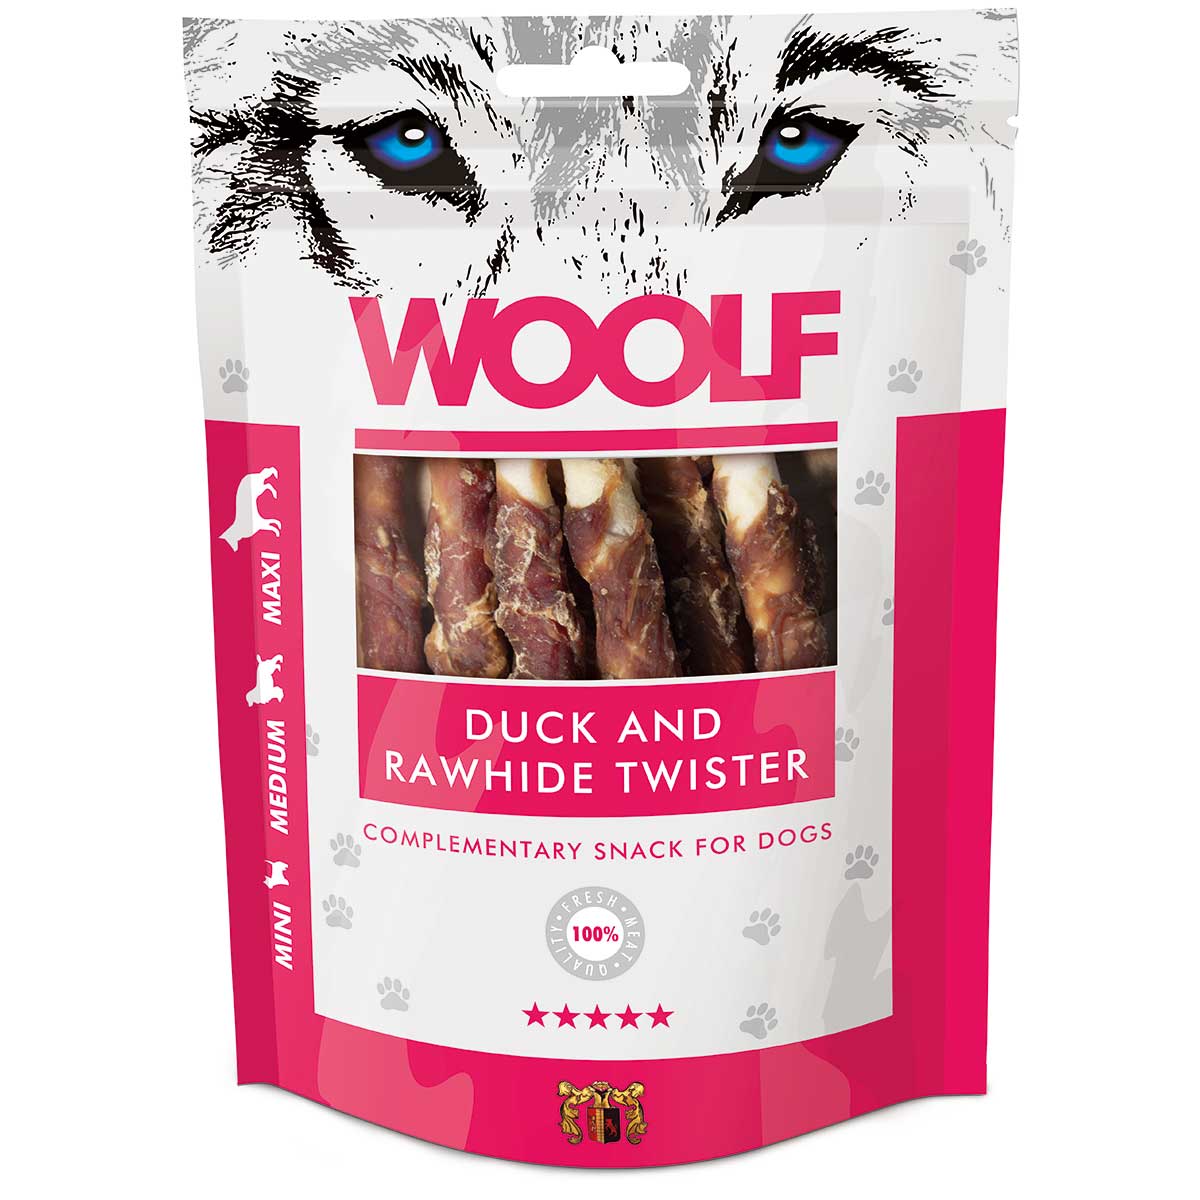 Woolf Dog treat duck and rawhide twister